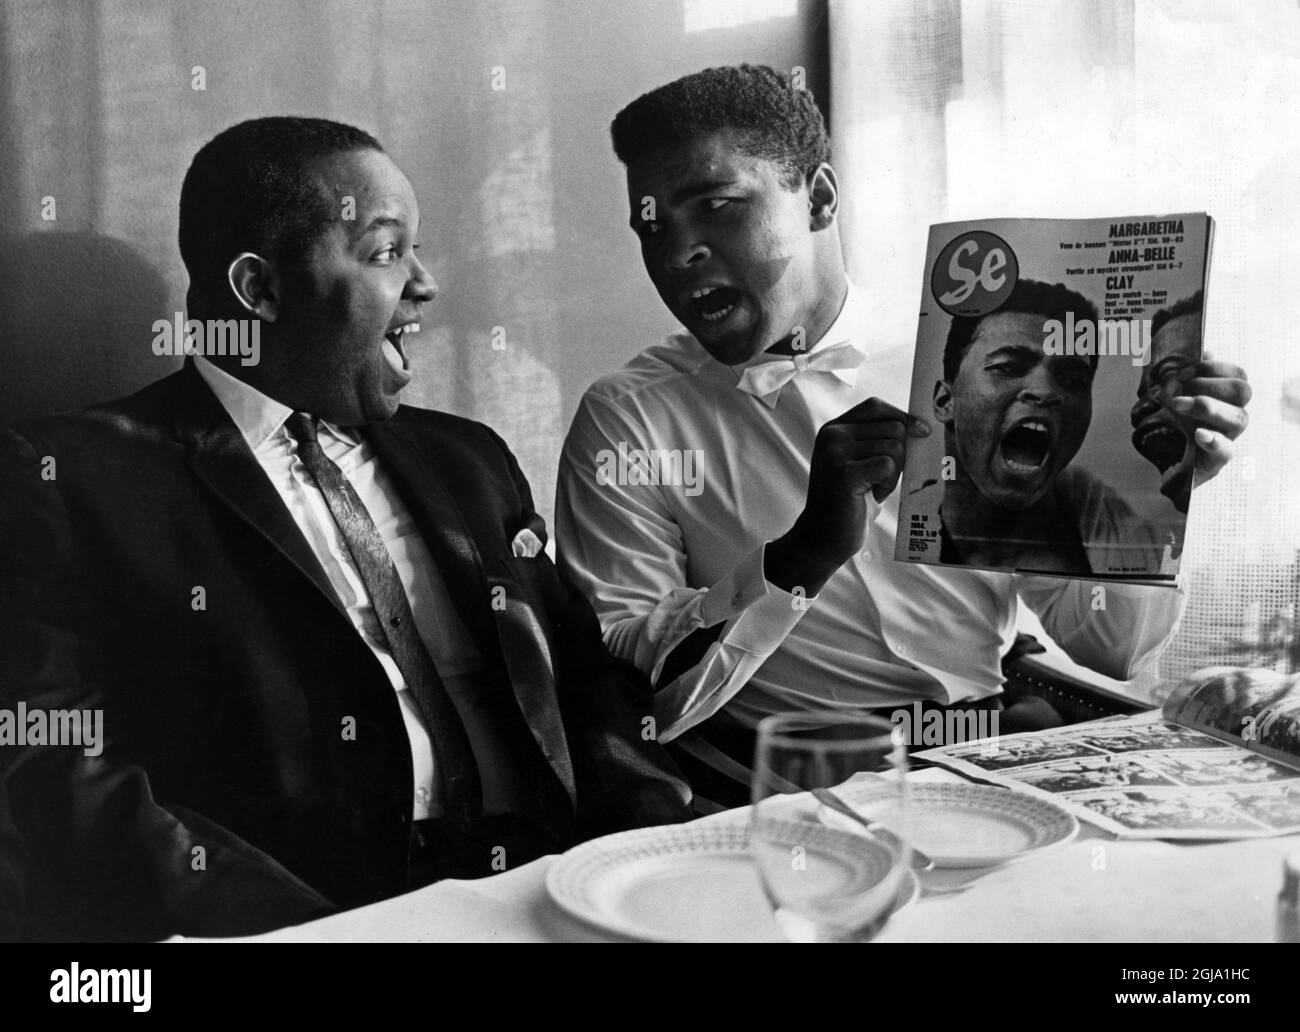 ARKIV STOCKHOLM 196508. World Boxing Champion Muhammad Ali is seen showing a cover of a Swedish magazin for his councellor Herbert Muhammed in Stockholm, Sweden 1965. Ali was in Sweden for en exhibition fight. Foto: Sven-Gosta Johansson / Scanpix / Kod: 262  Stock Photo